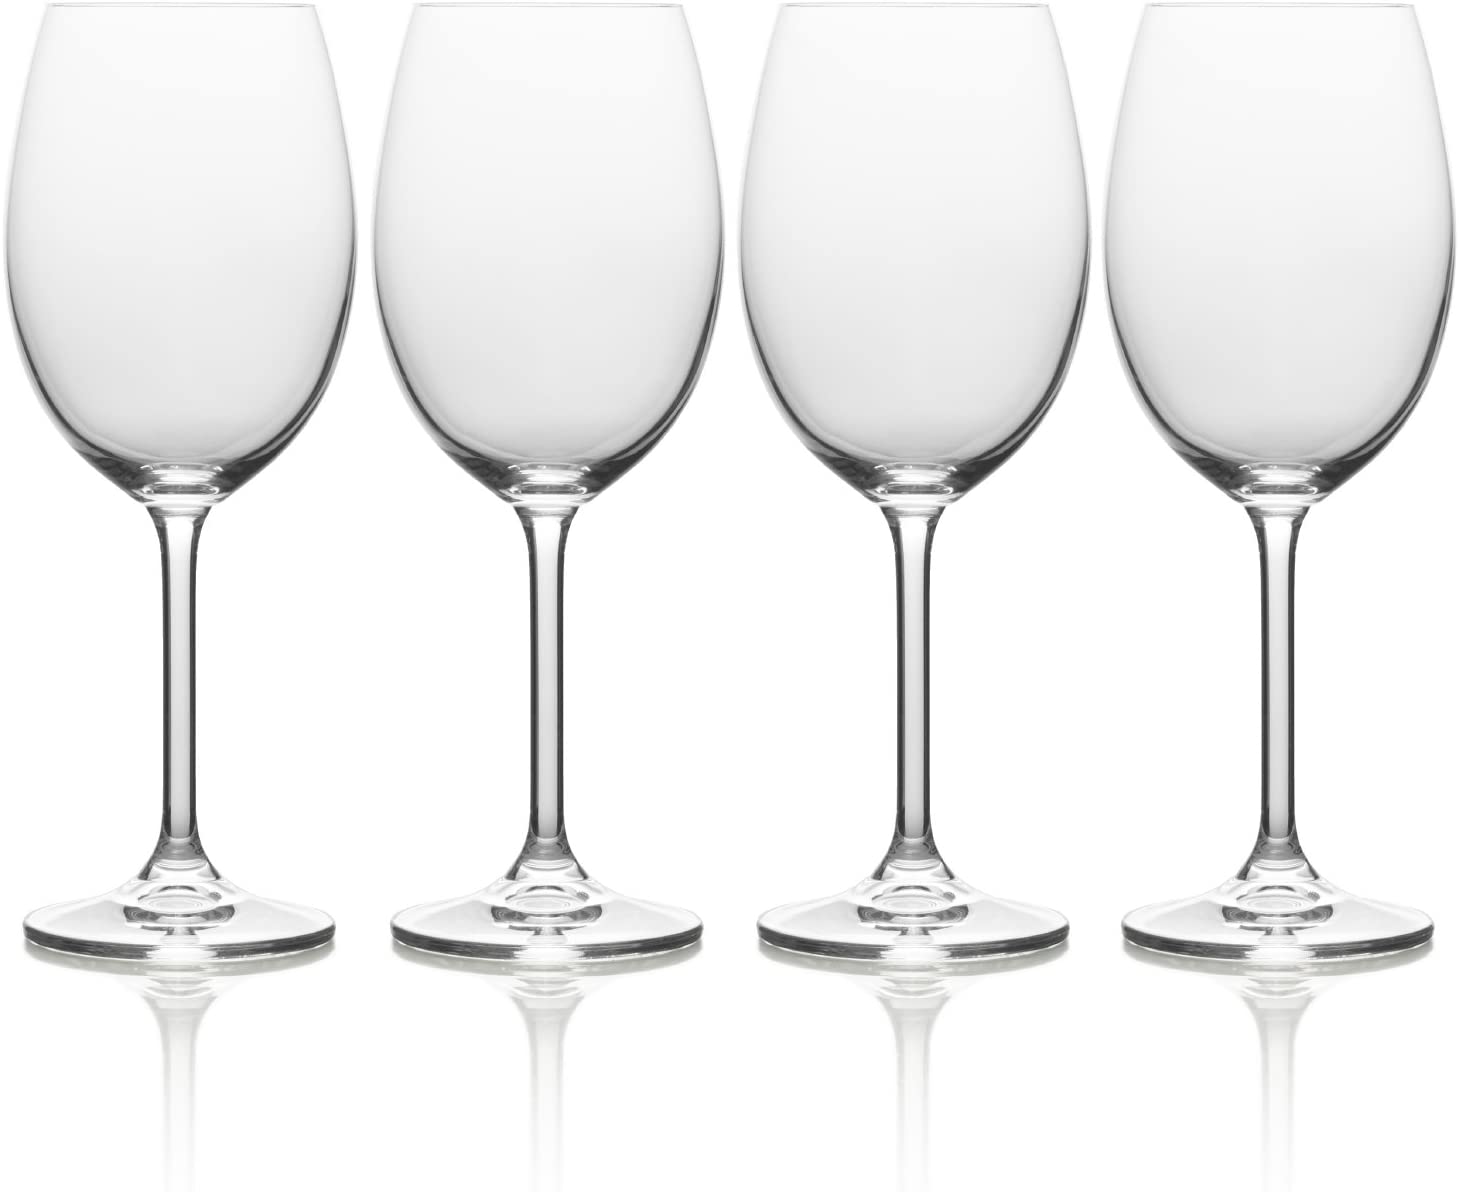 These elegant white wine glasses from the Julie collection are made of fine...